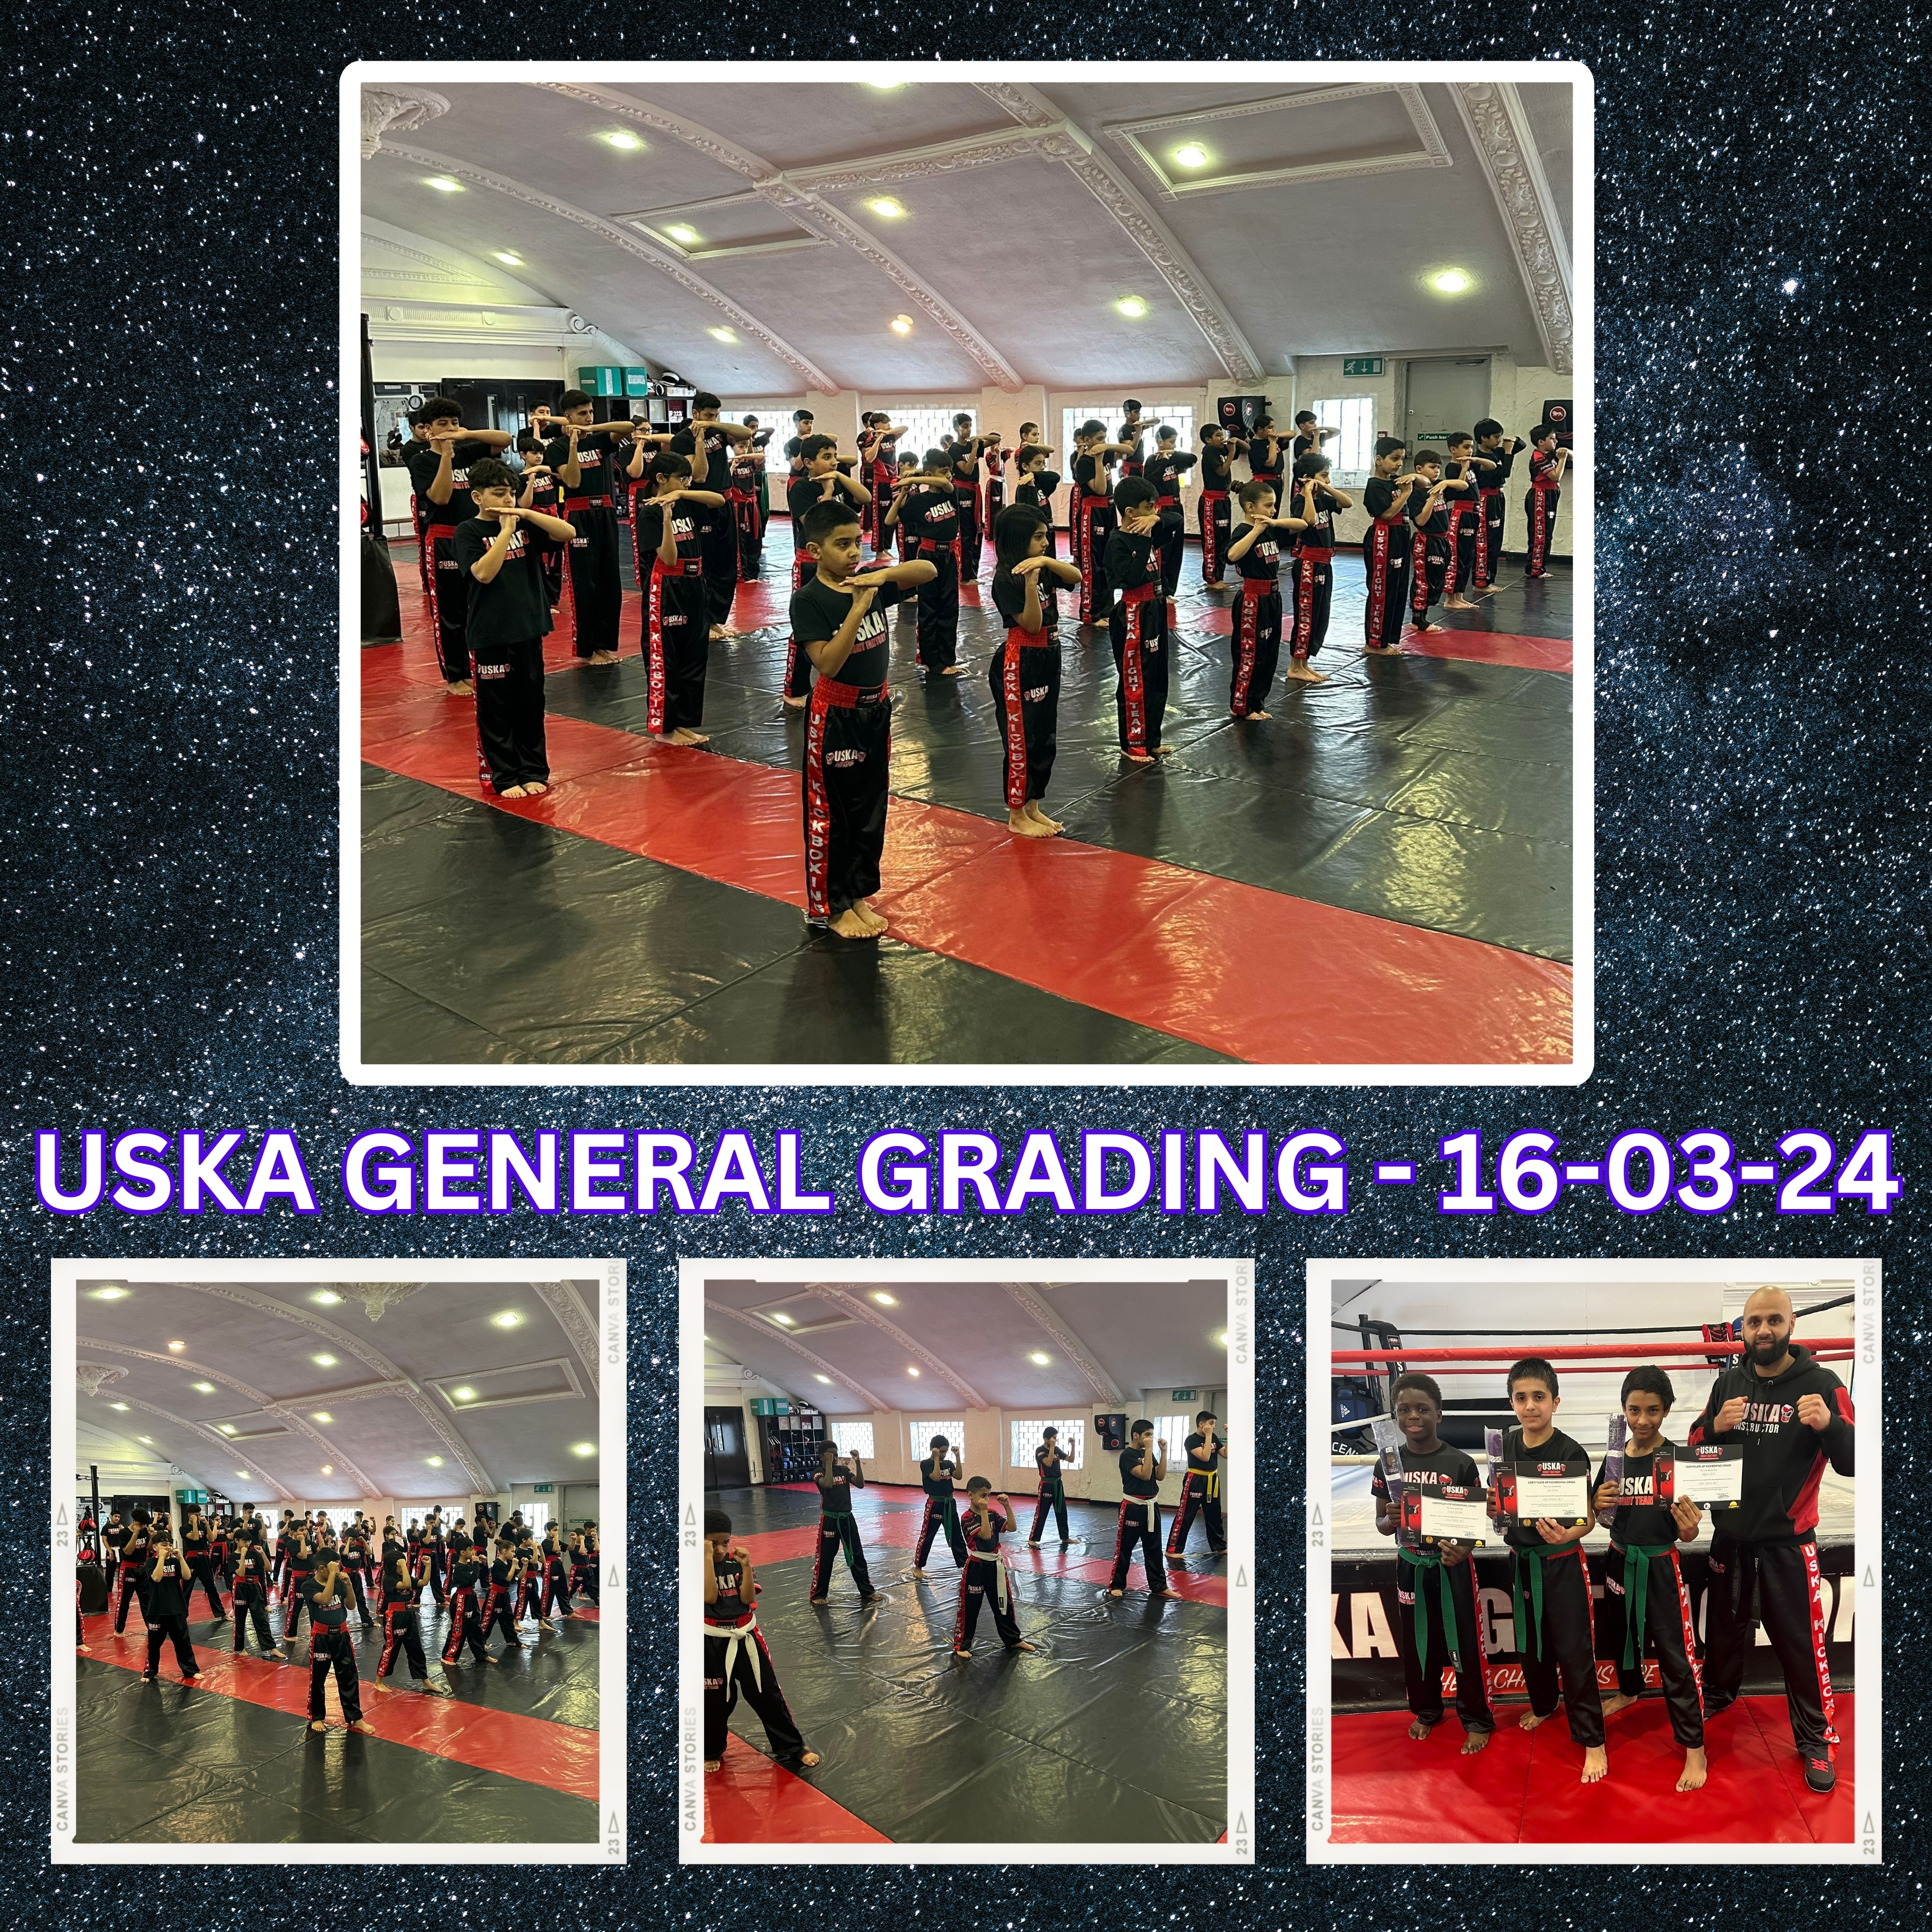 16-03-24 - Another USKA General Grading completed at the USKA Fight Factory!